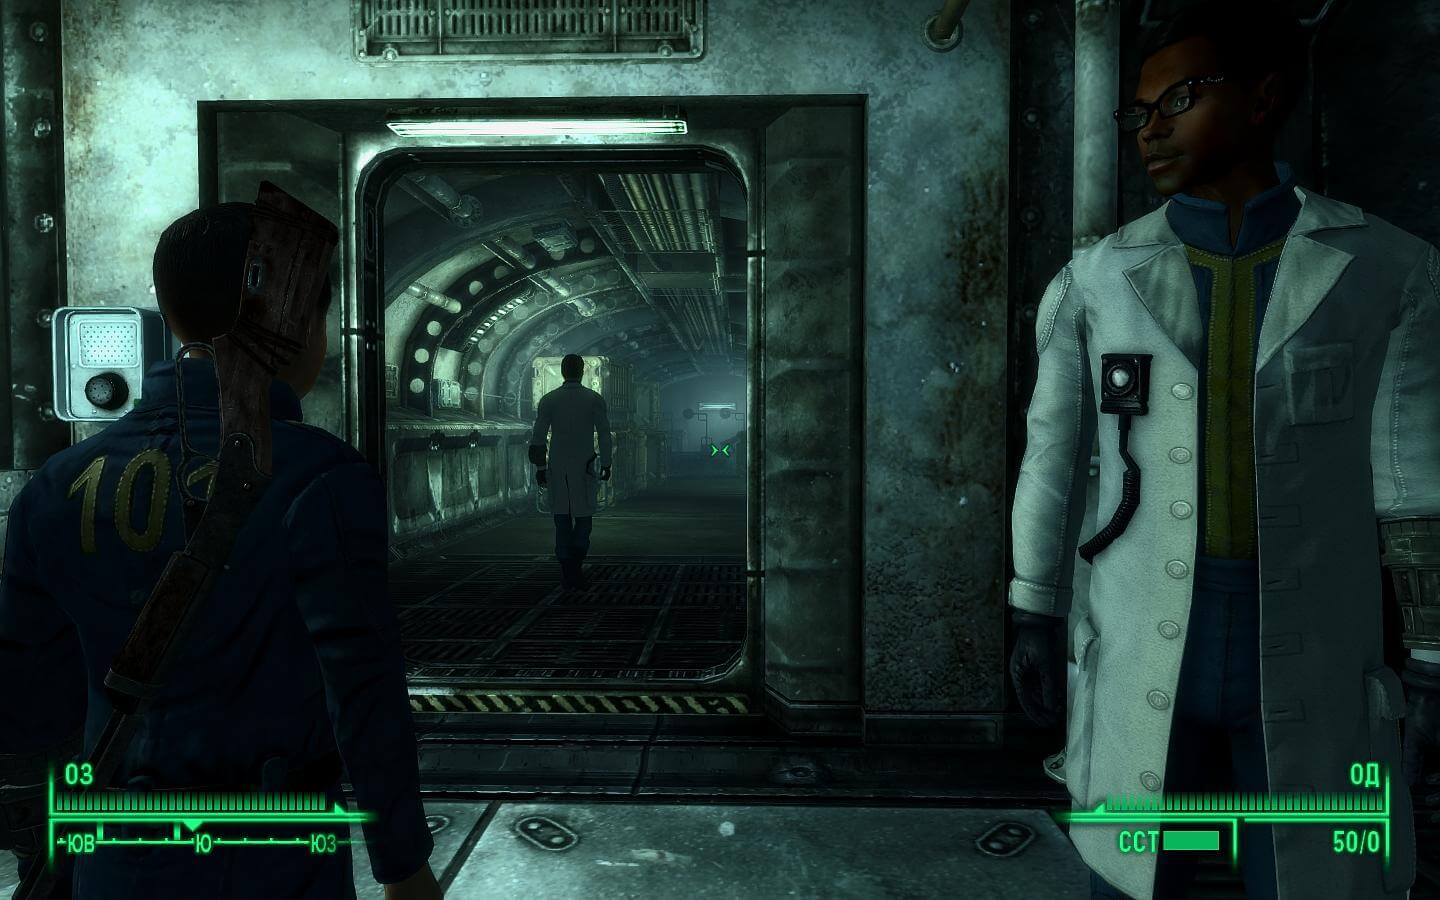 Версия fallout 3. Fallout 3 (2009). Fallout 3 GOTY Edition. Фоллаут 3 золотое издание. Фоллаут 3 2022.